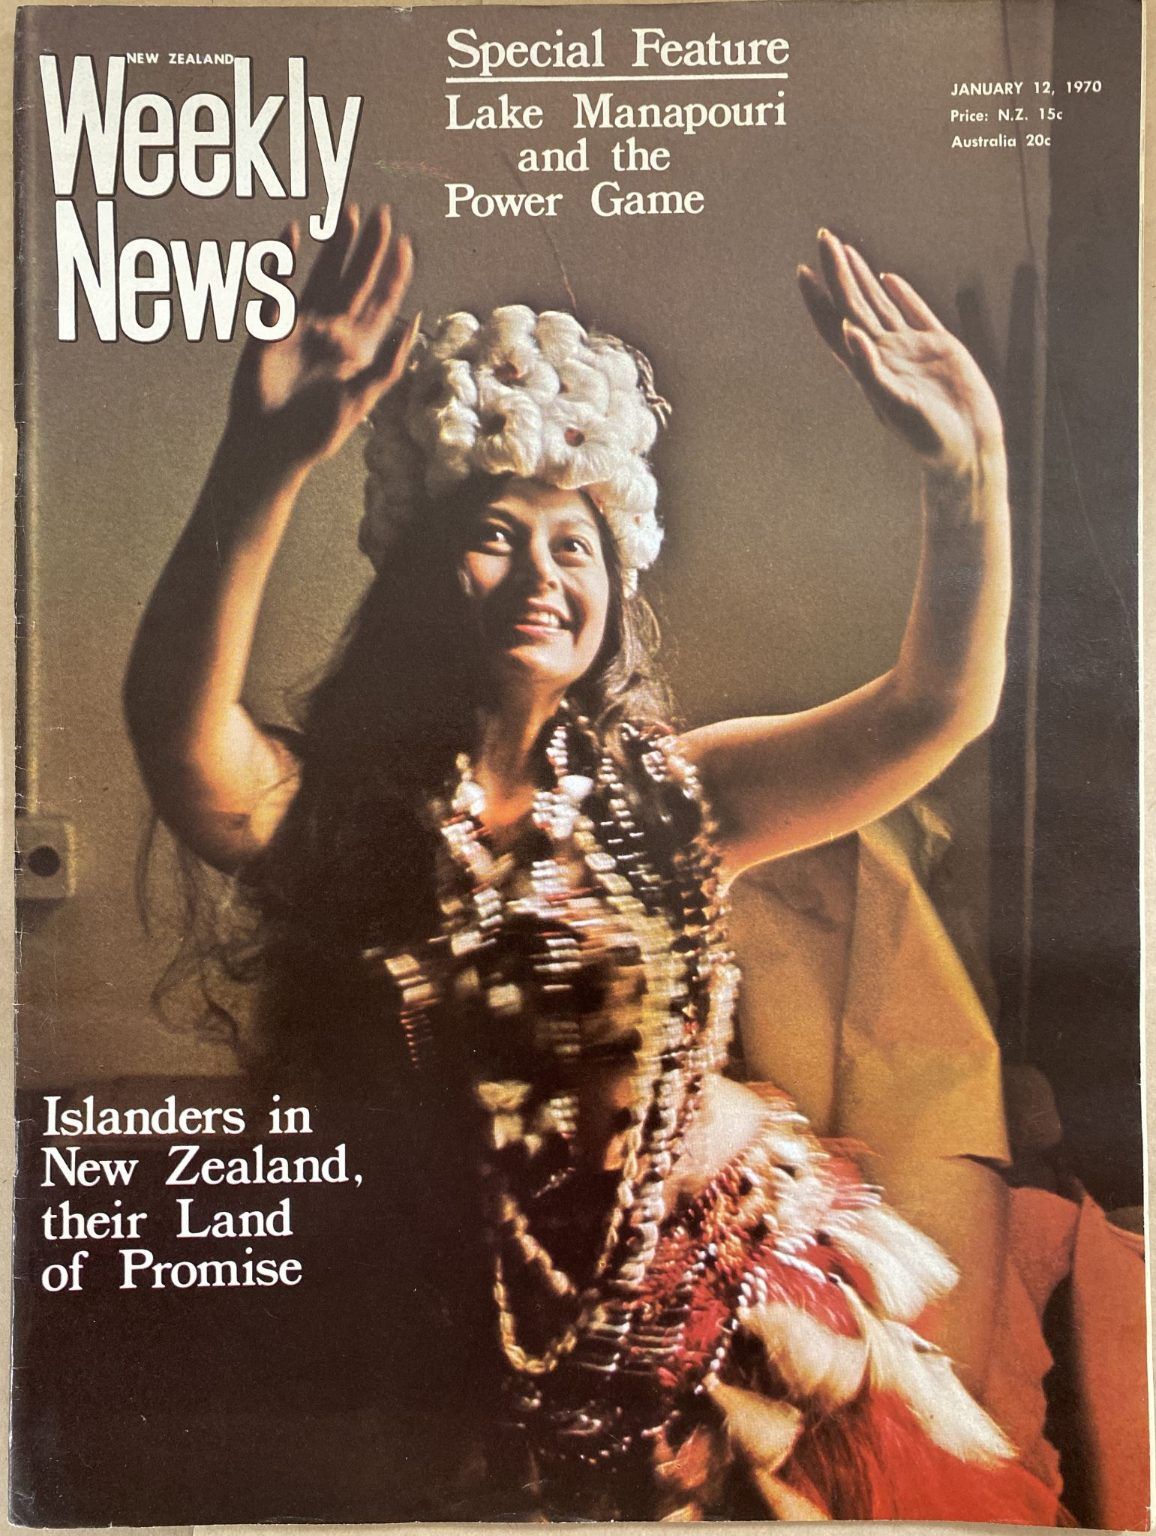 OLD NEWSPAPER: New Zealand Weekly News, No. 5537, 12 January 1970